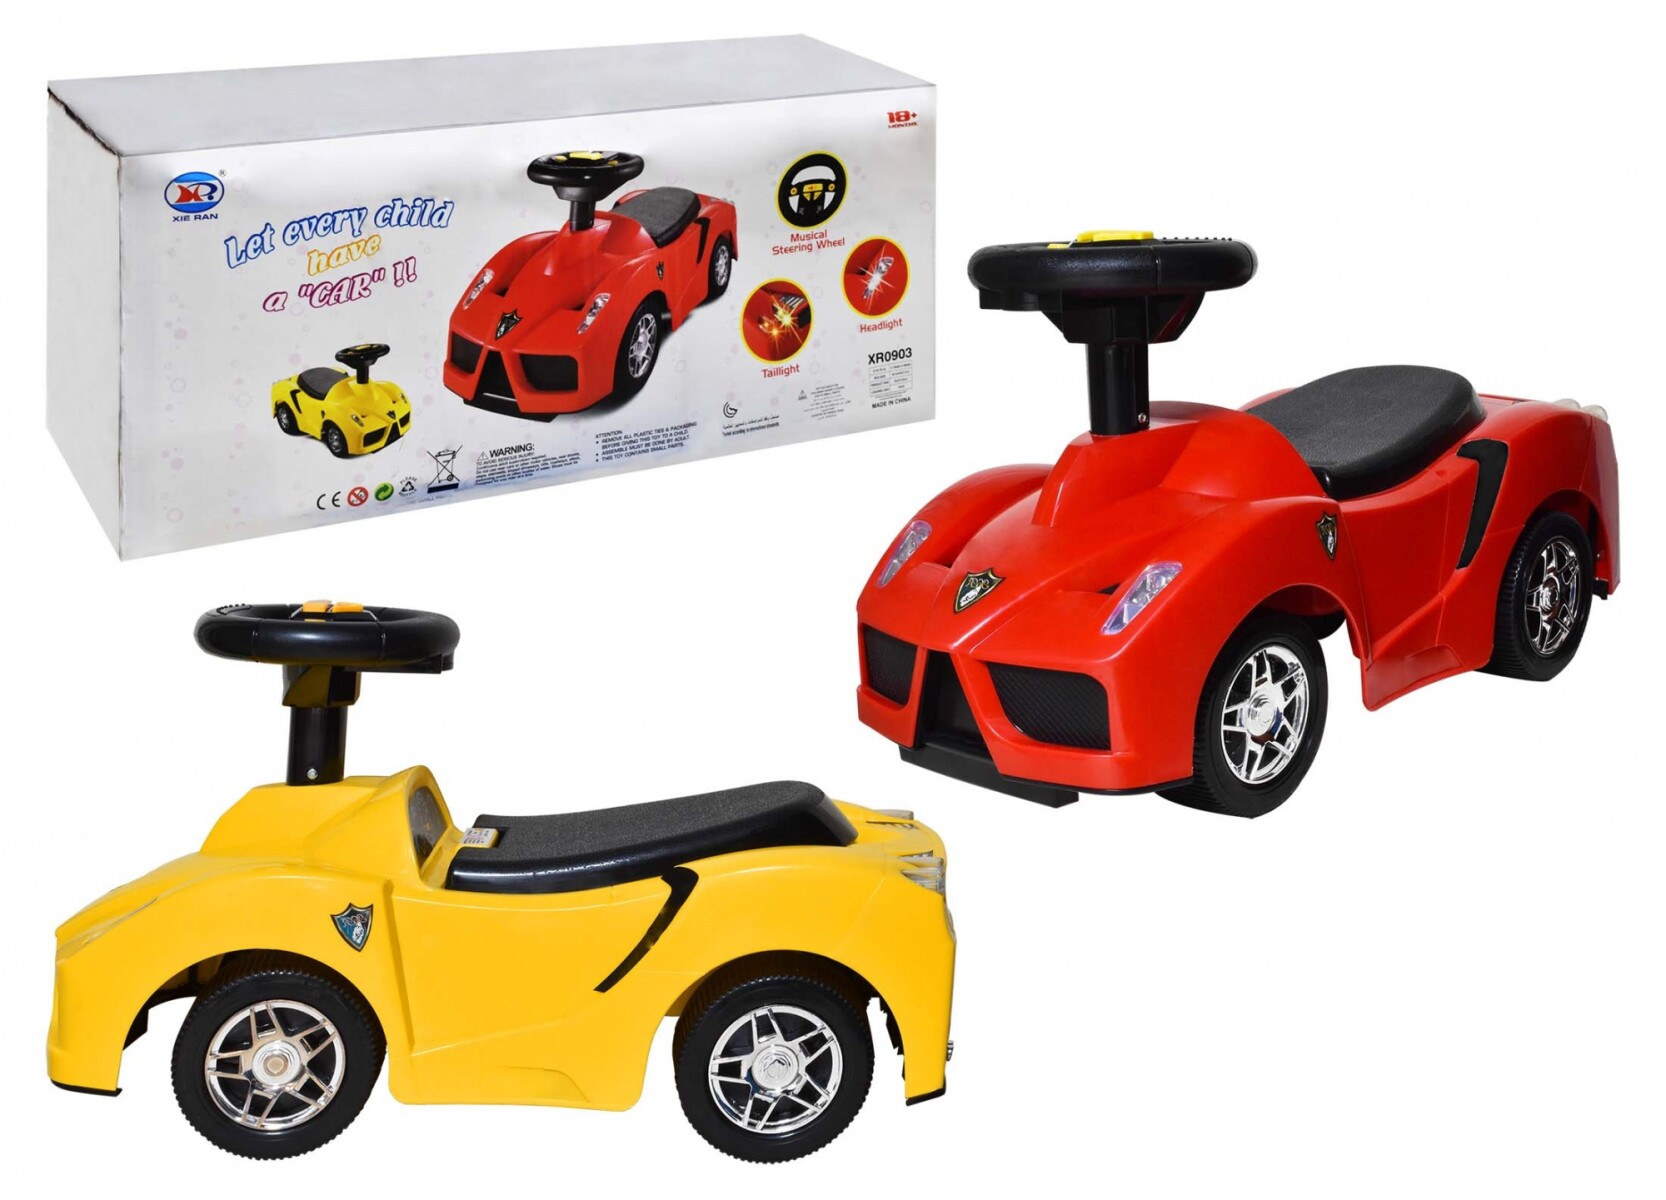 BUGGY TIPO AUTO XR0903 